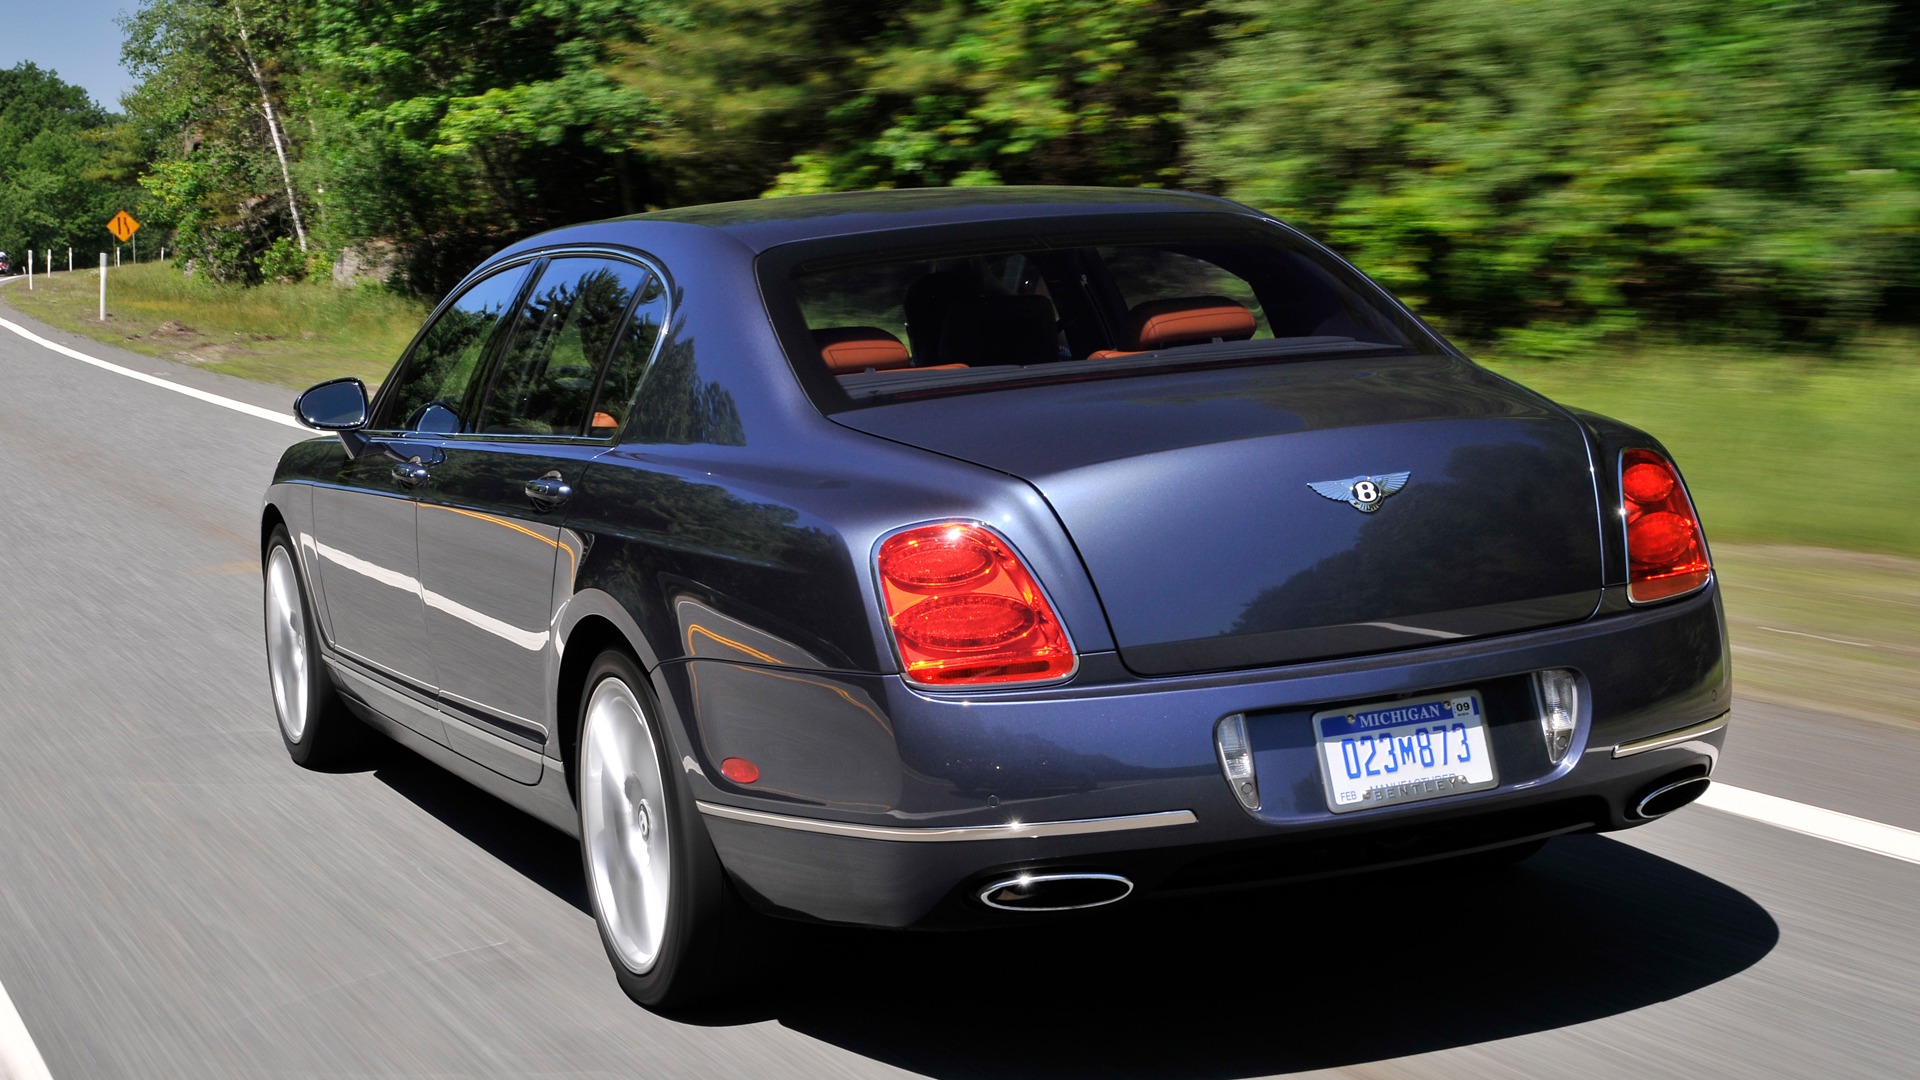 Bentley Continental Flying Spur Speed - 2008 賓利 #13 - 1920x1080